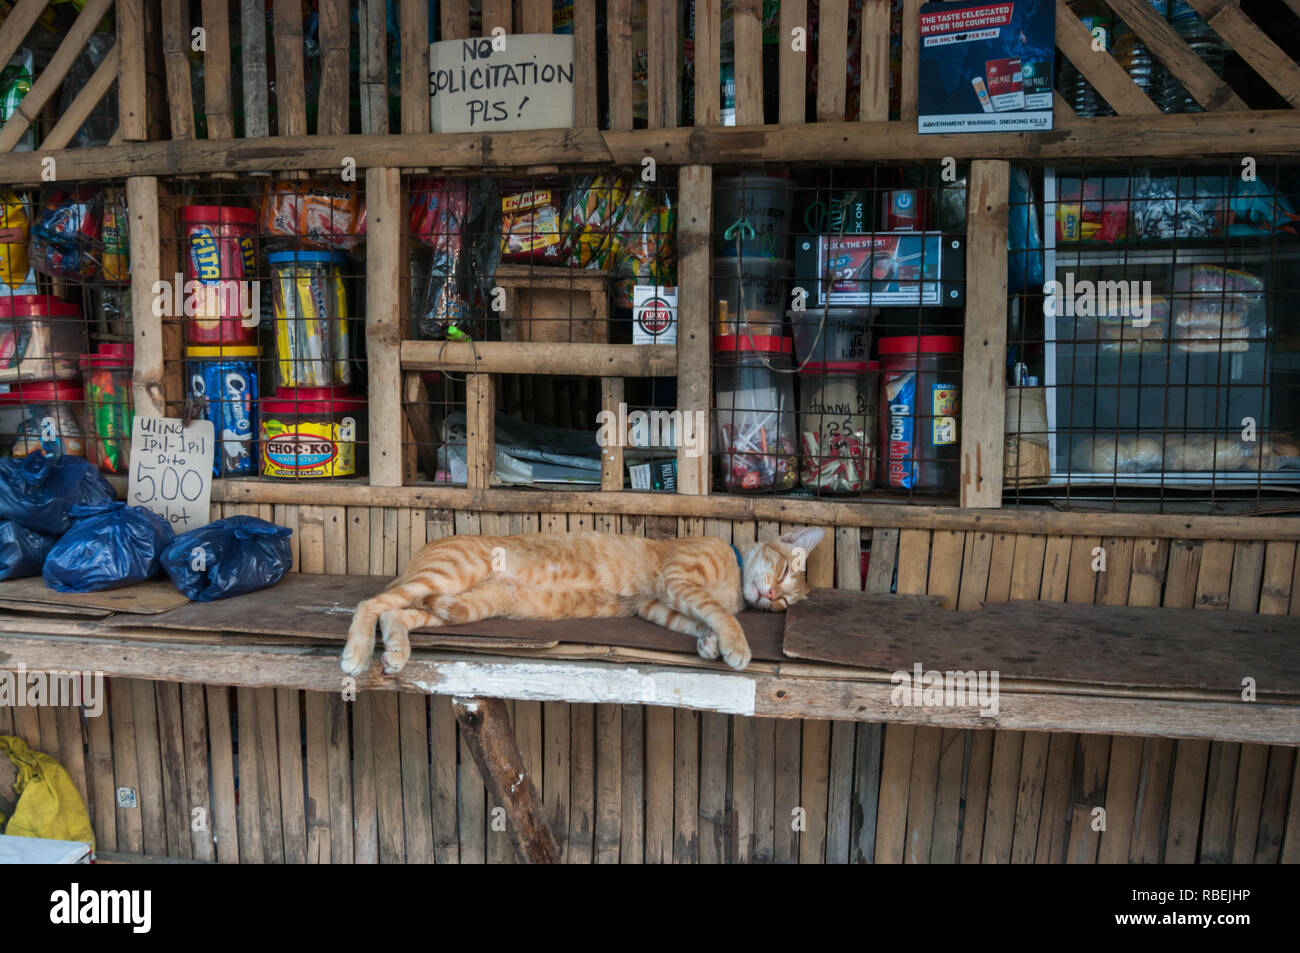 Side view of healthy looking feline wearing pet collar taking a cat nap on perch at a store where business appears slow in the Philippines. Stock Photo